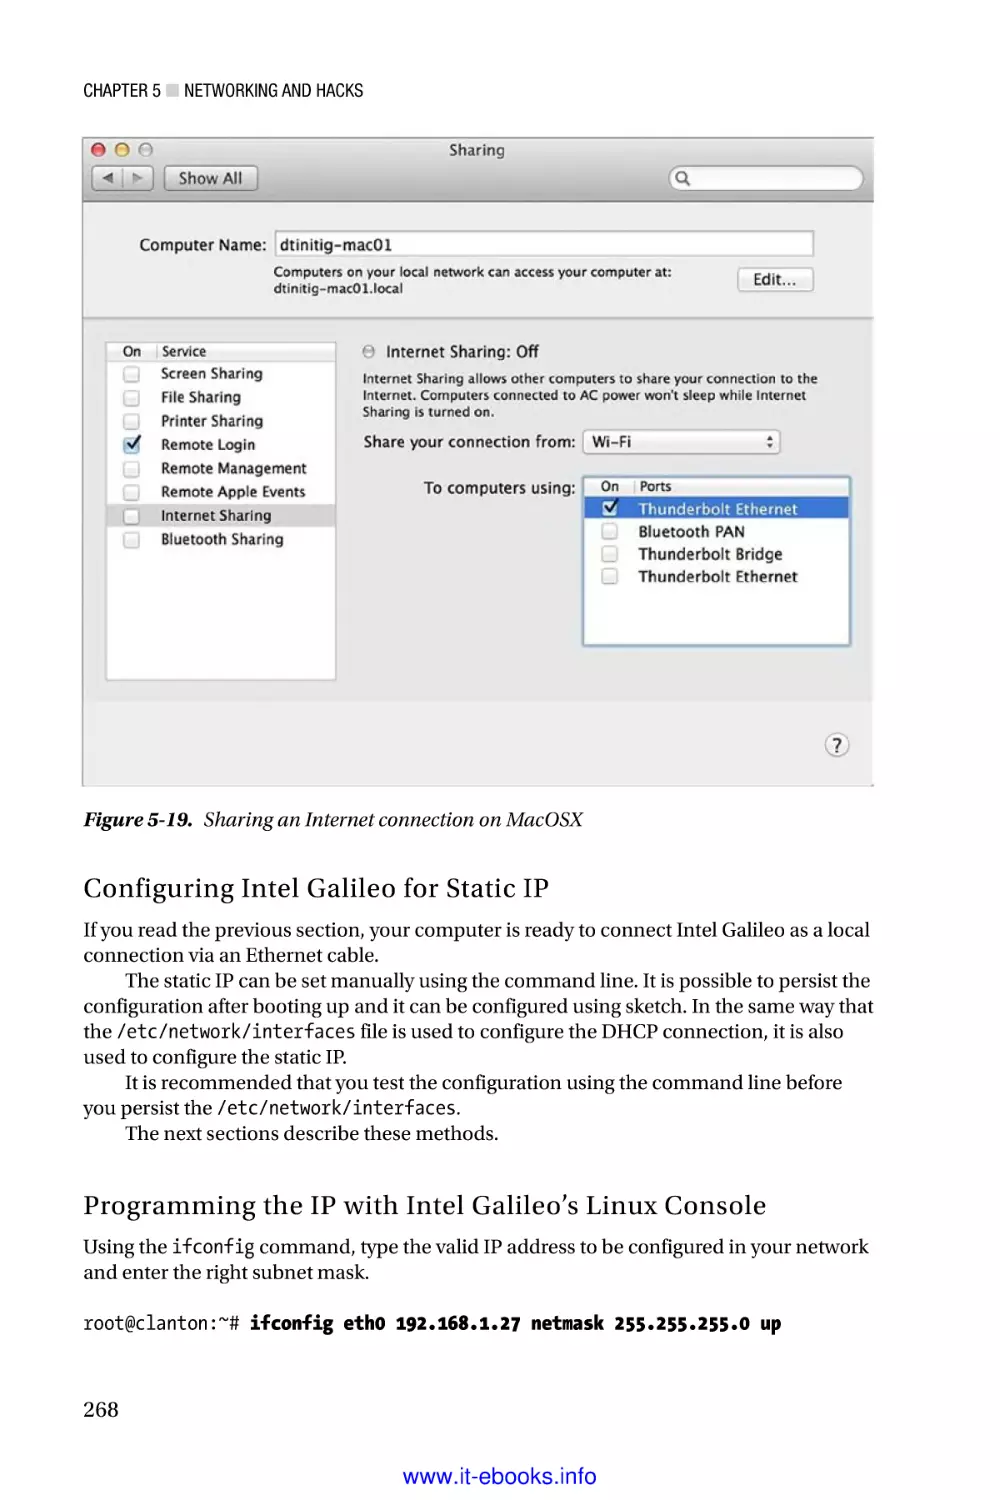 Configuring Intel Galileo for Static IP
Programming the IP with Intel Galileo’s Linux Console